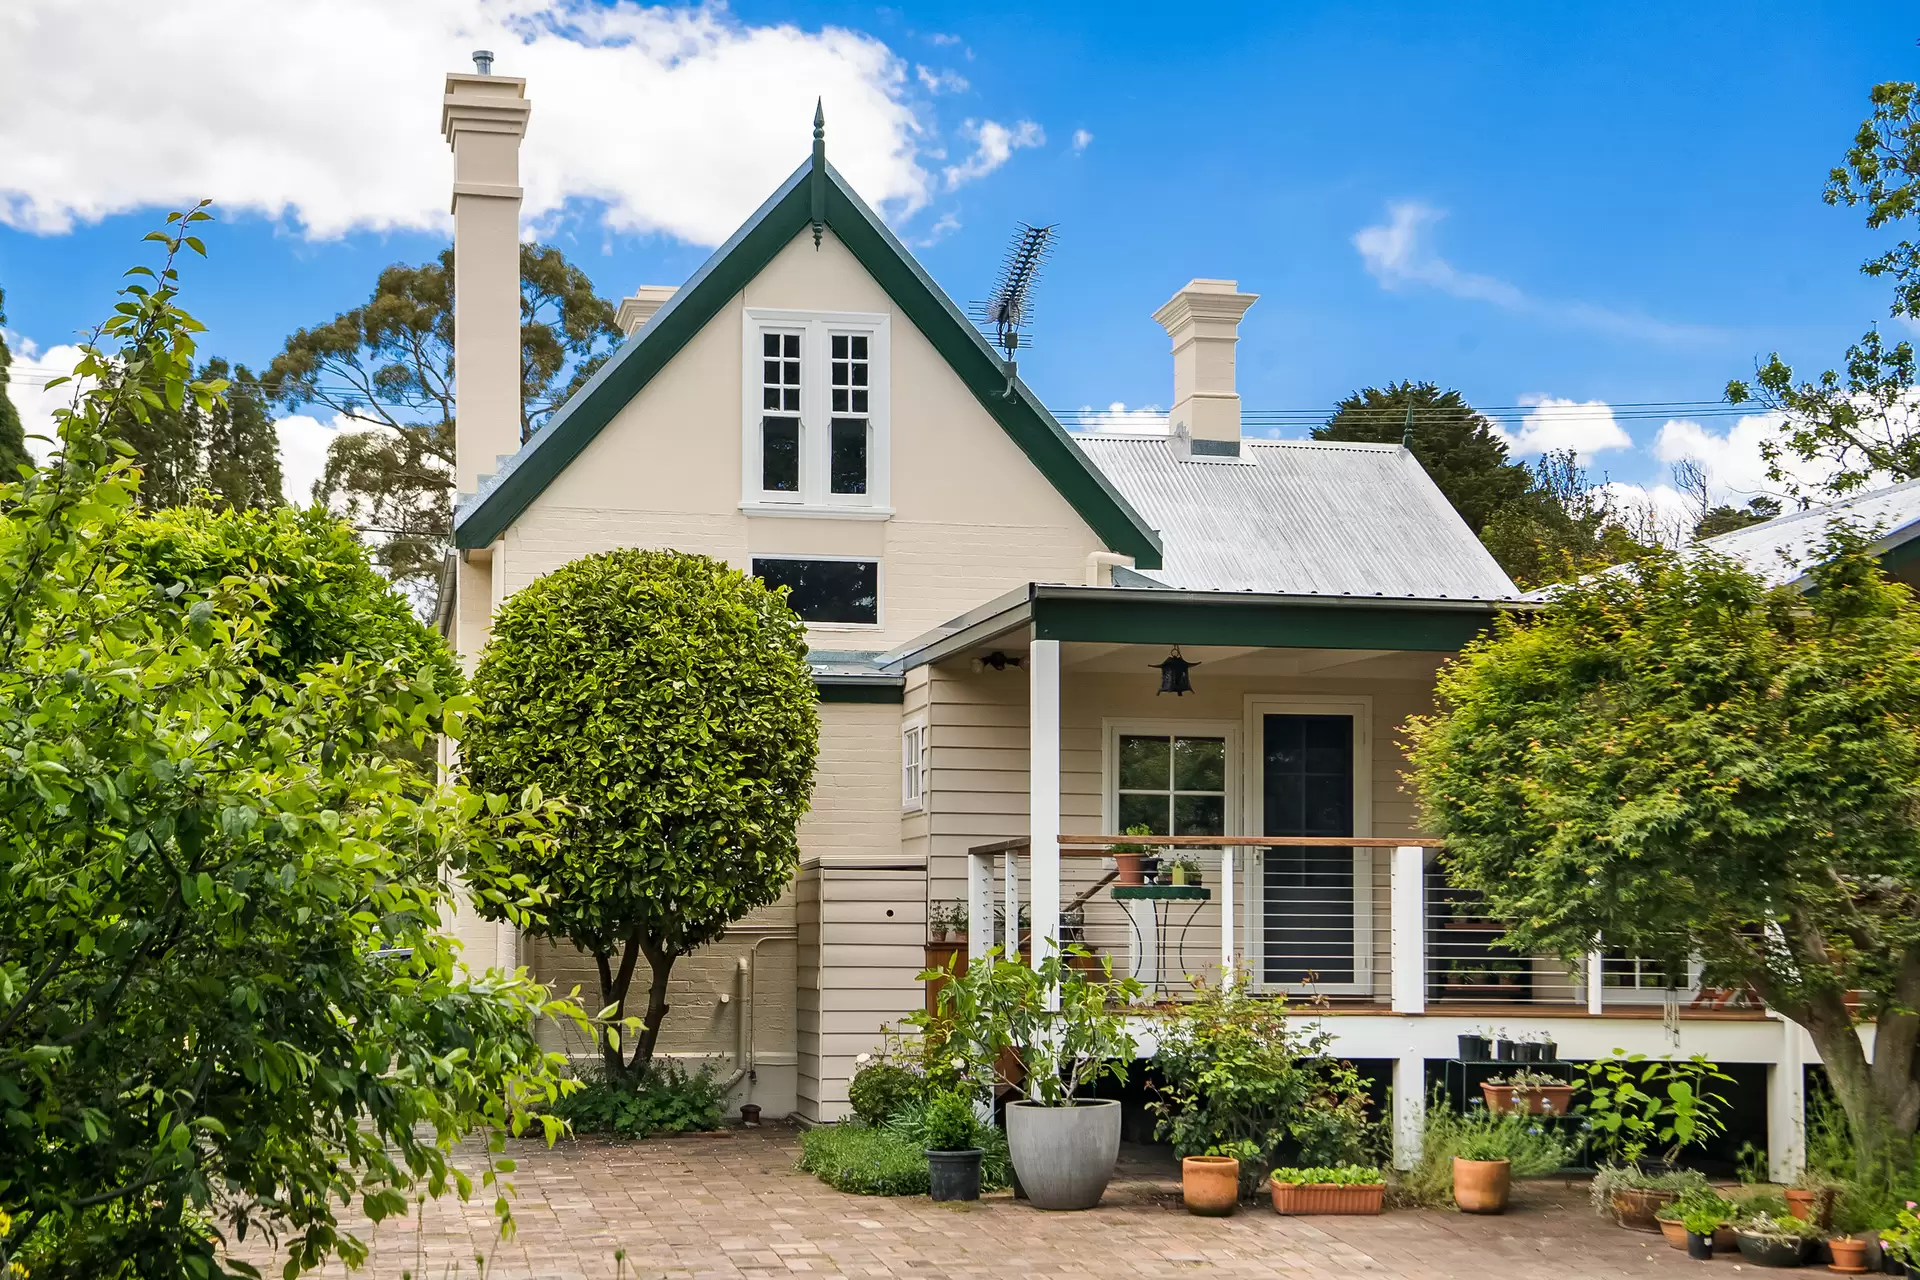 Photo #14: 76 Merrigang Street, Bowral - Sold by Drew Lindsay Sotheby's International Realty